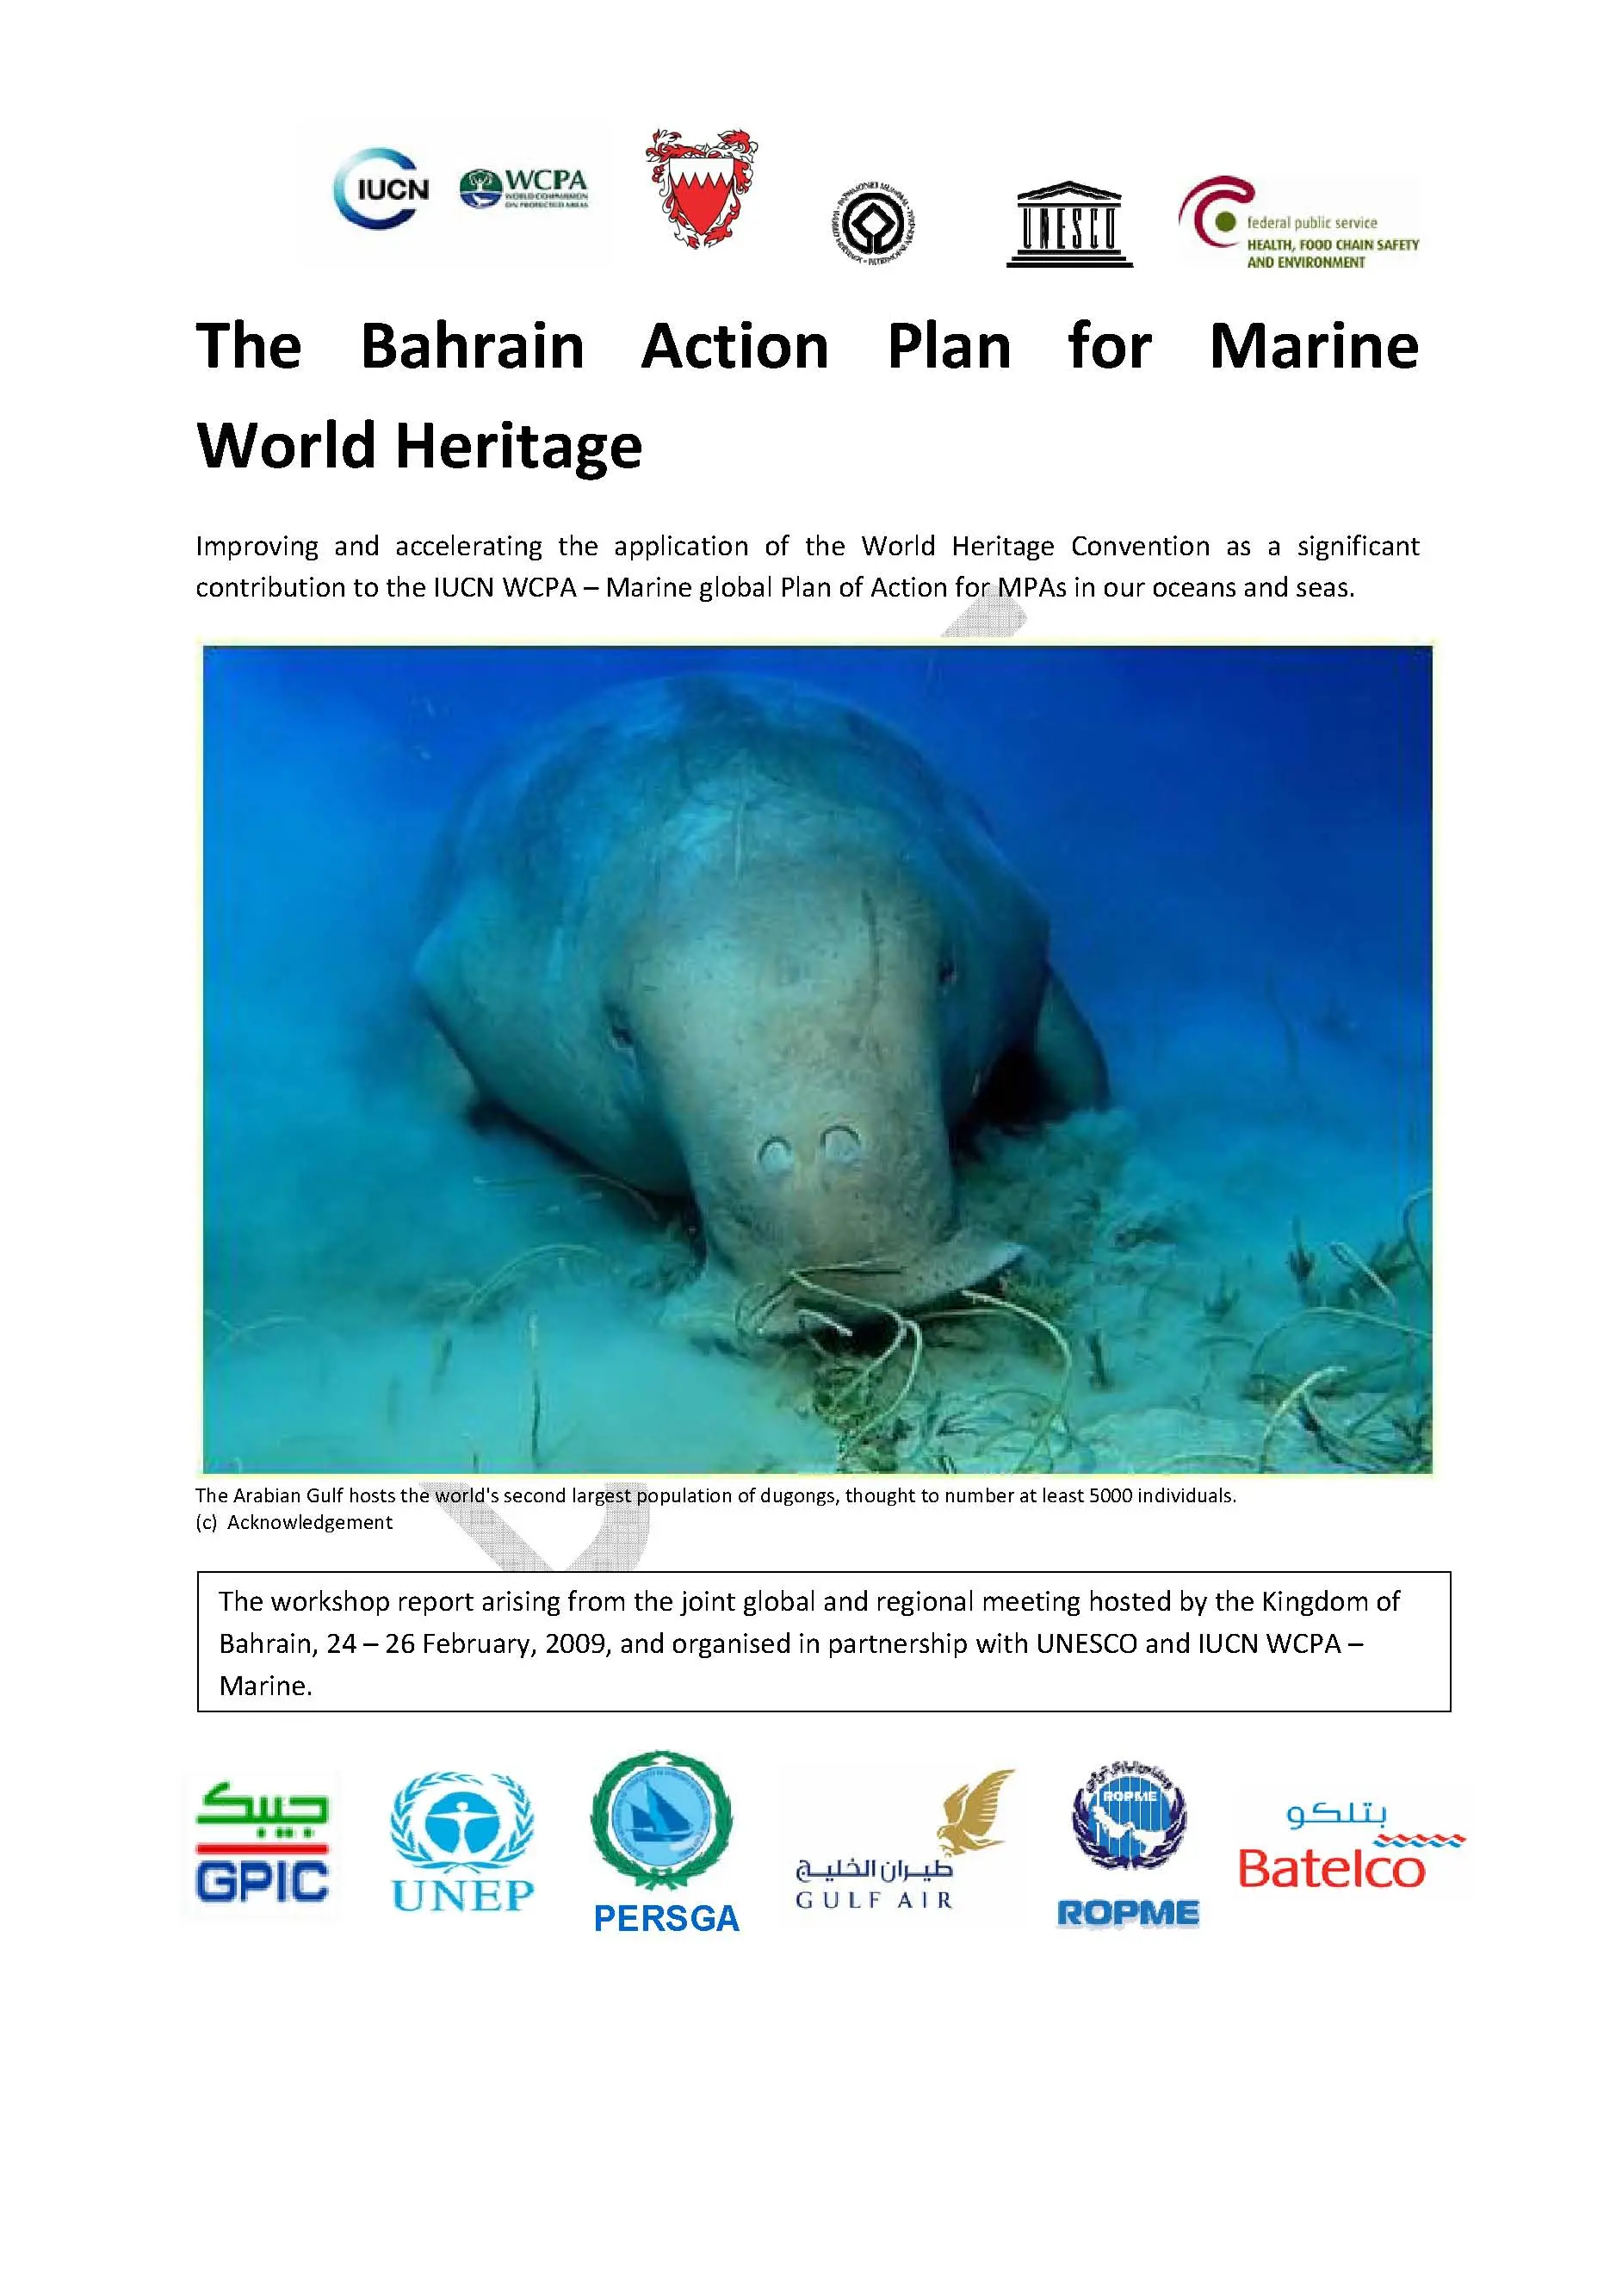 The Bahrein Action Plan for Marine World Heritage